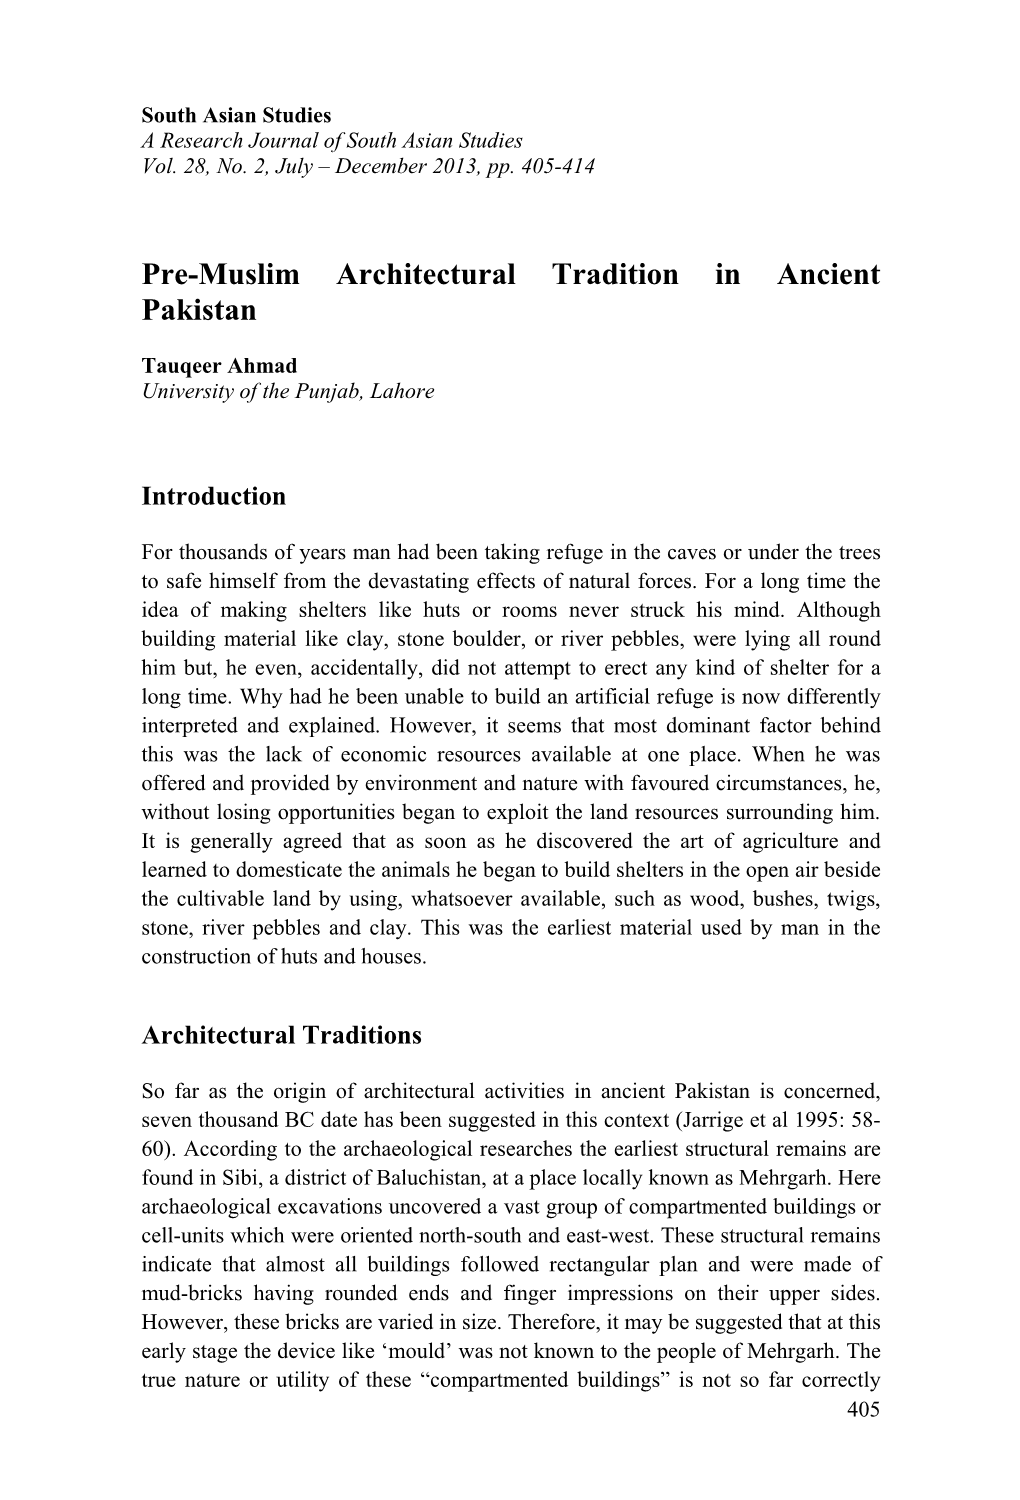 Pre-Muslim Architectural Tradition in Ancient Pakistan